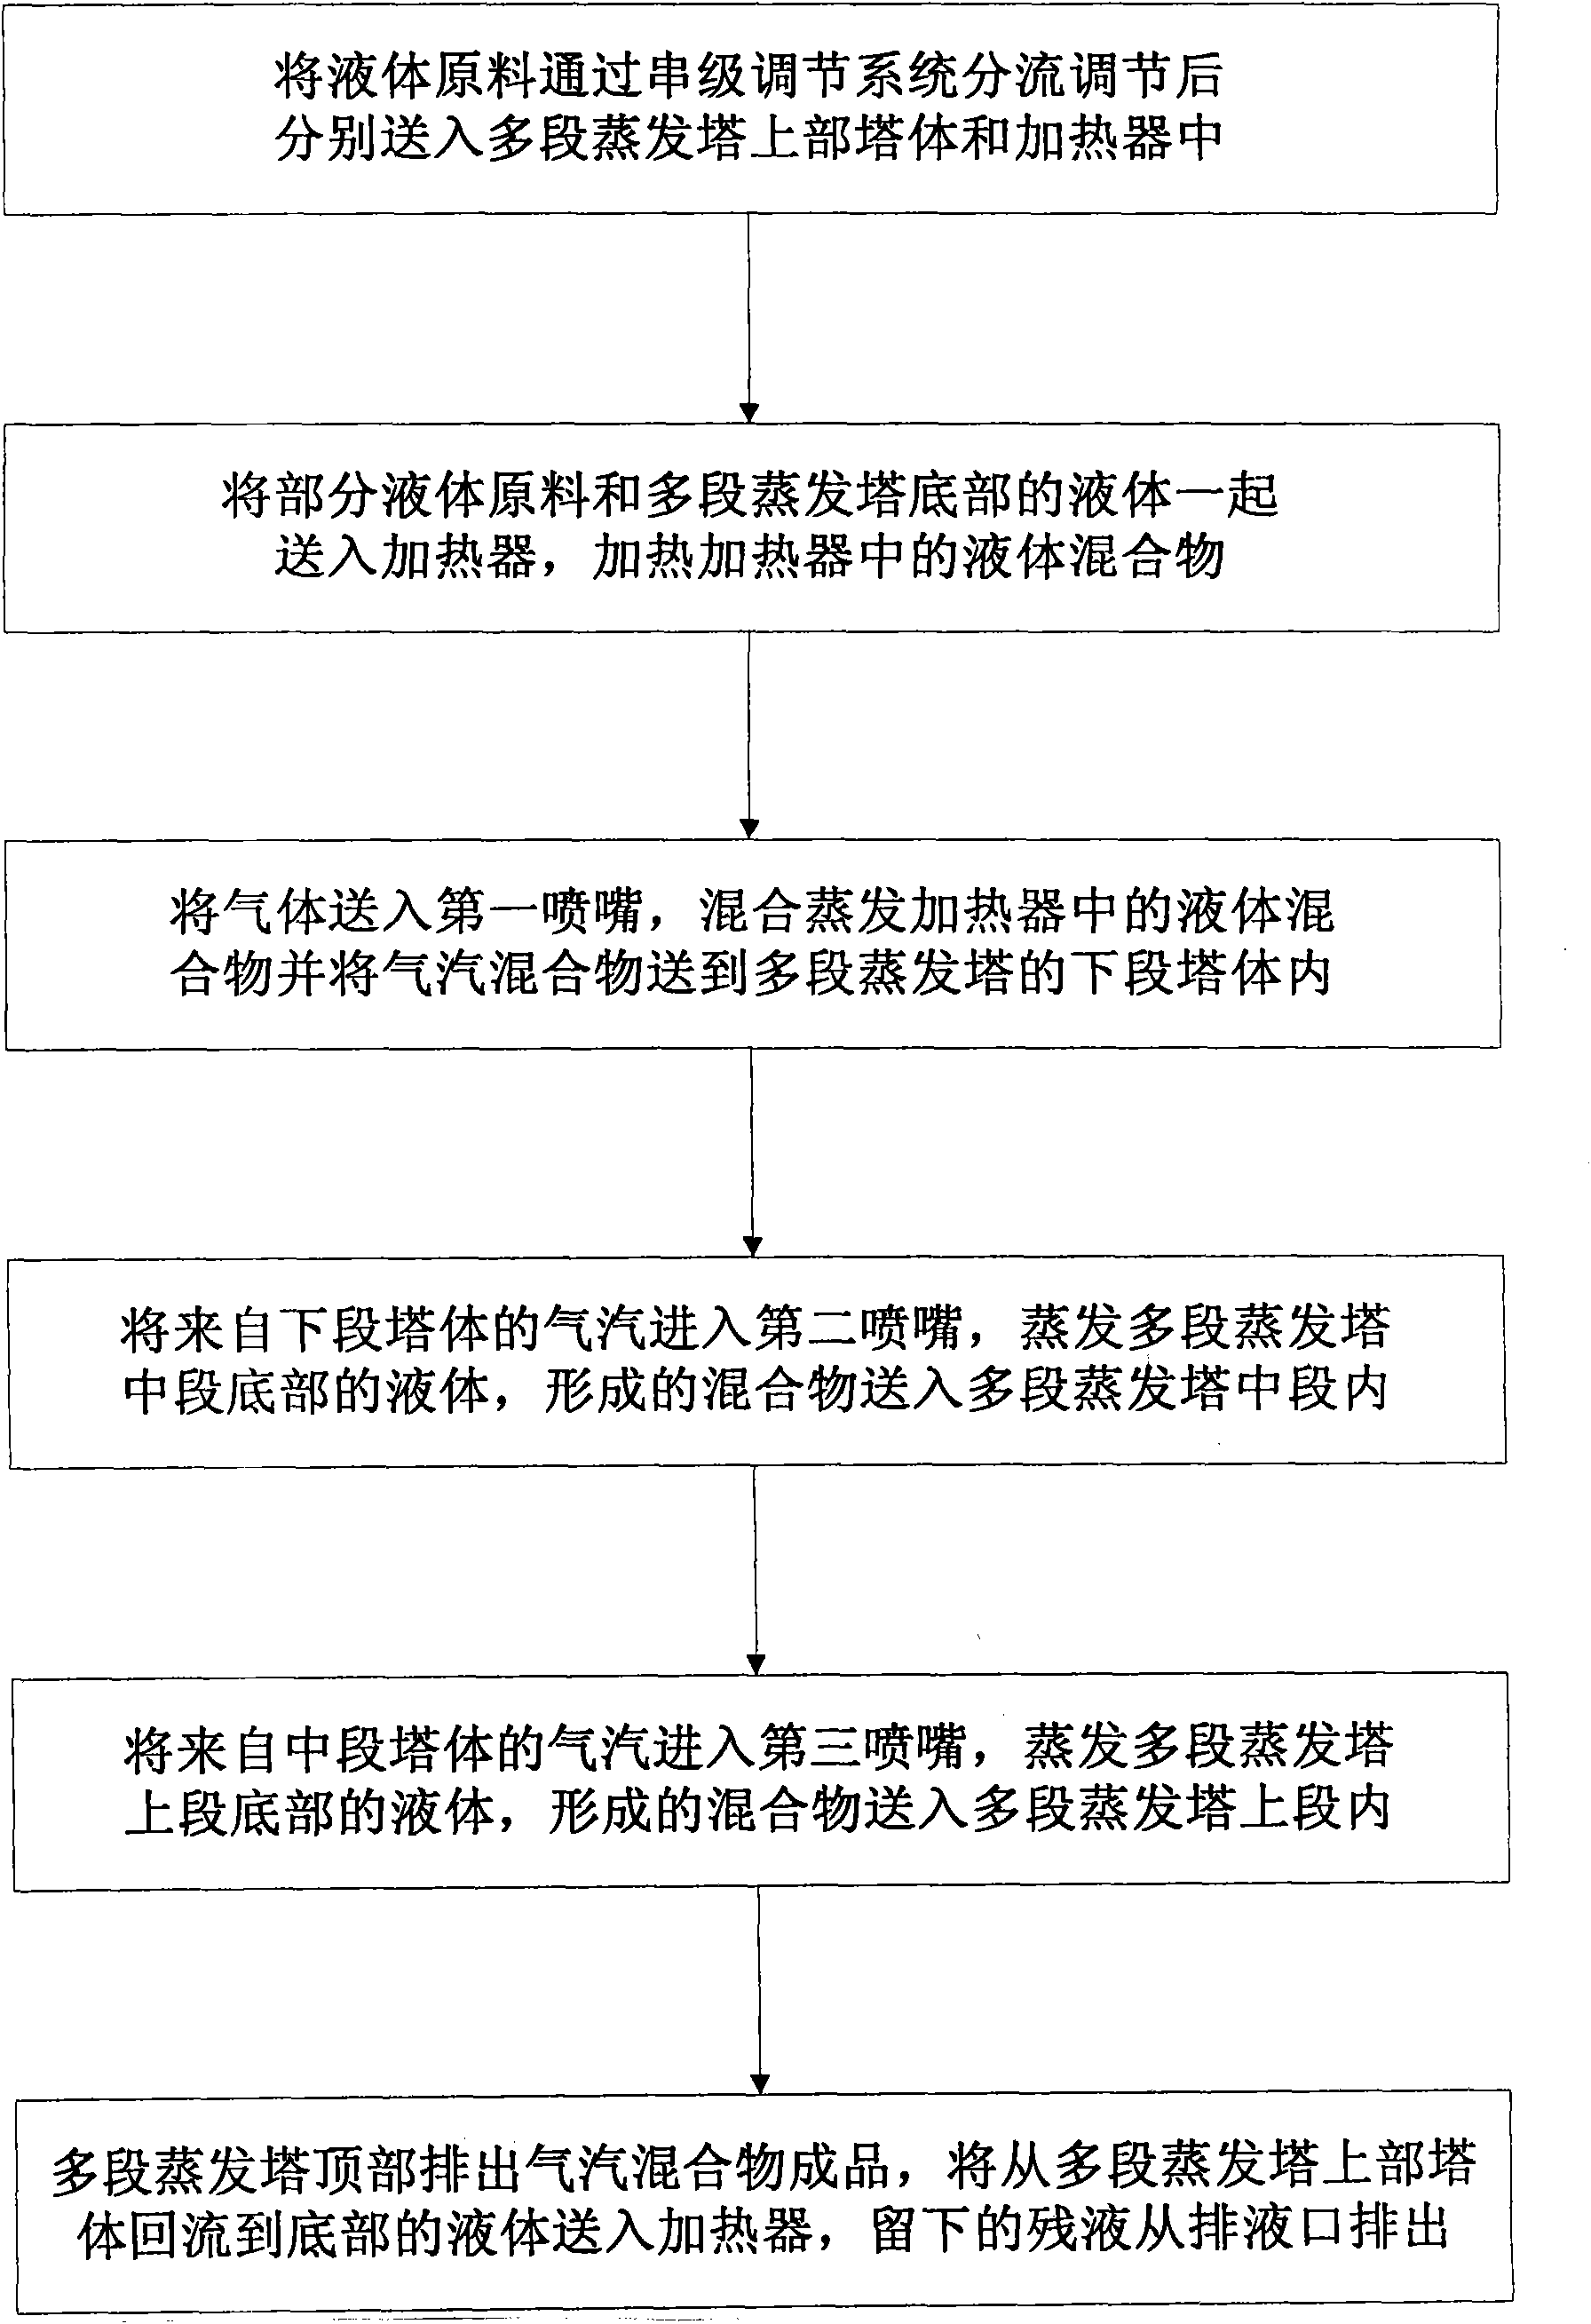 Multi-stage evaporation and air-vapour hybrid system and method thereof